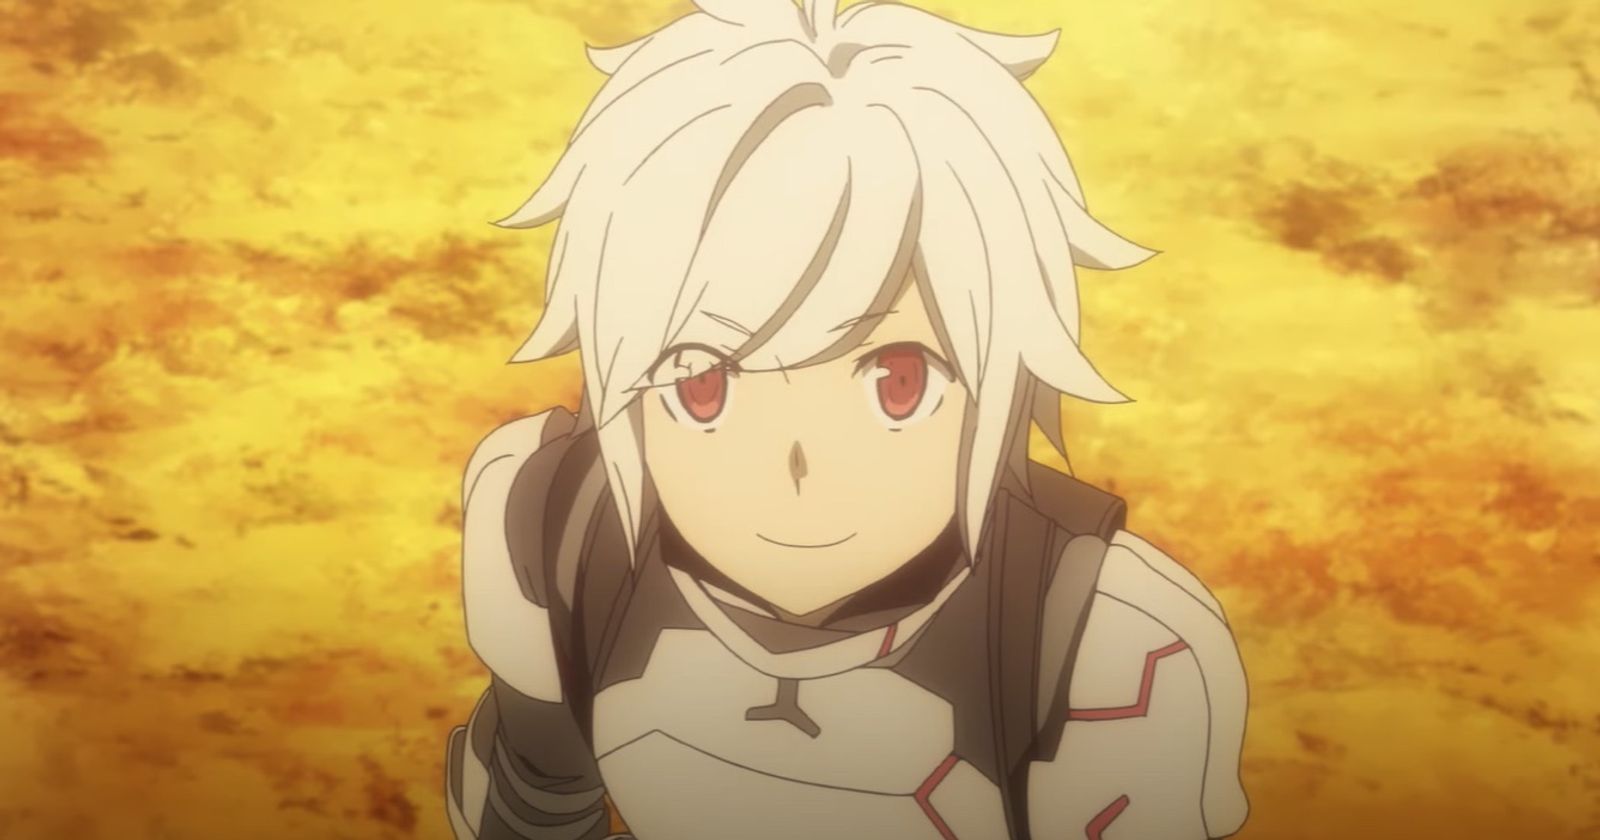 Prime Video: Is It Wrong to Try to Pick Up Girls in a Dungeon?: Season 4